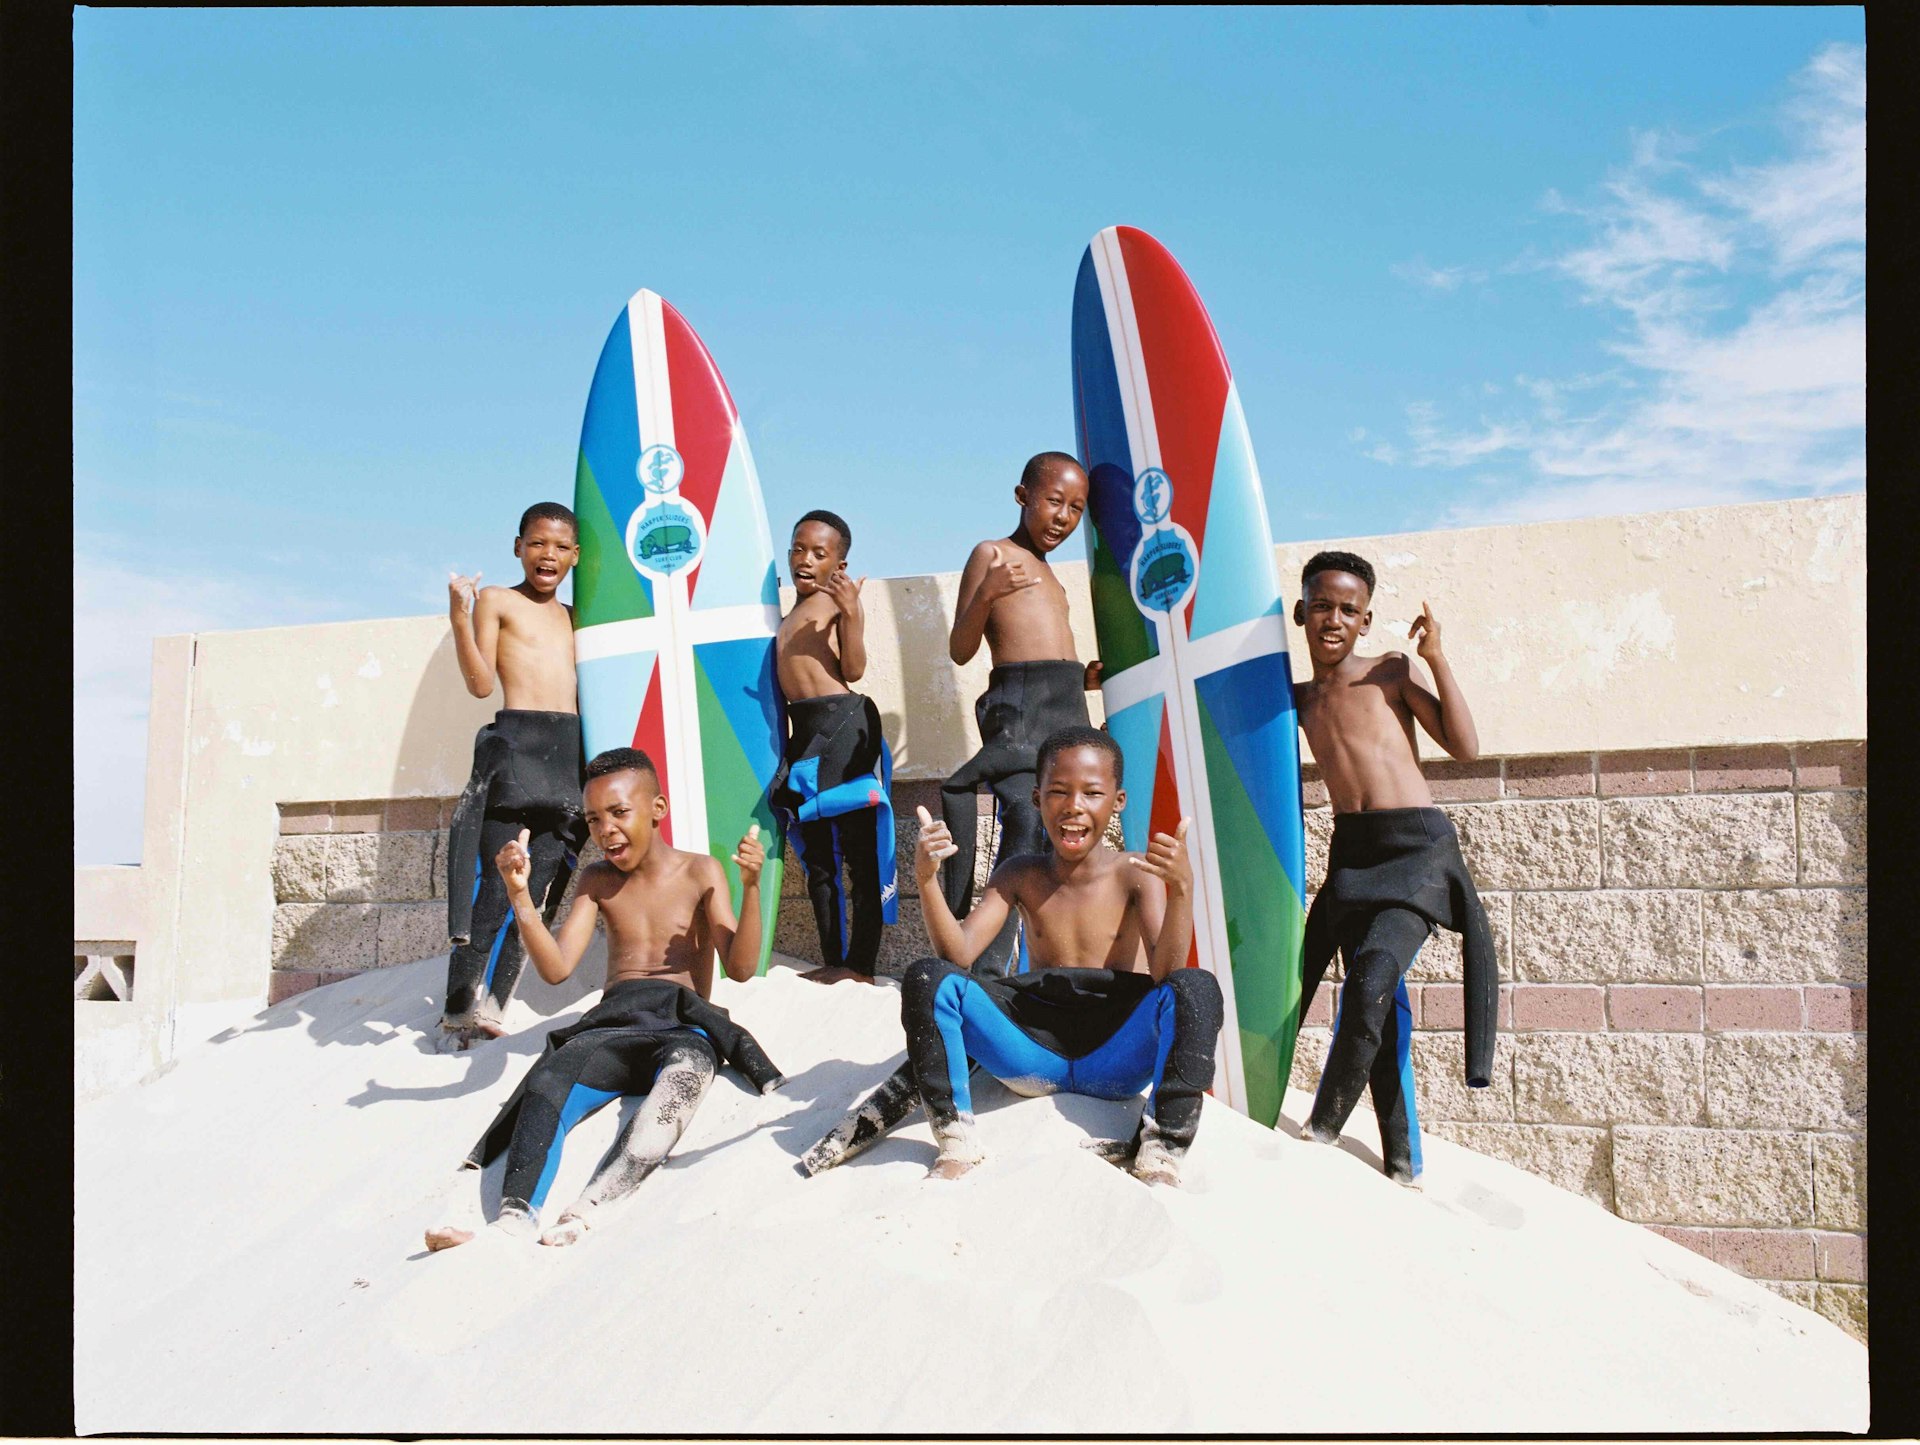 The surf club raising funds for at risk children in Liberia